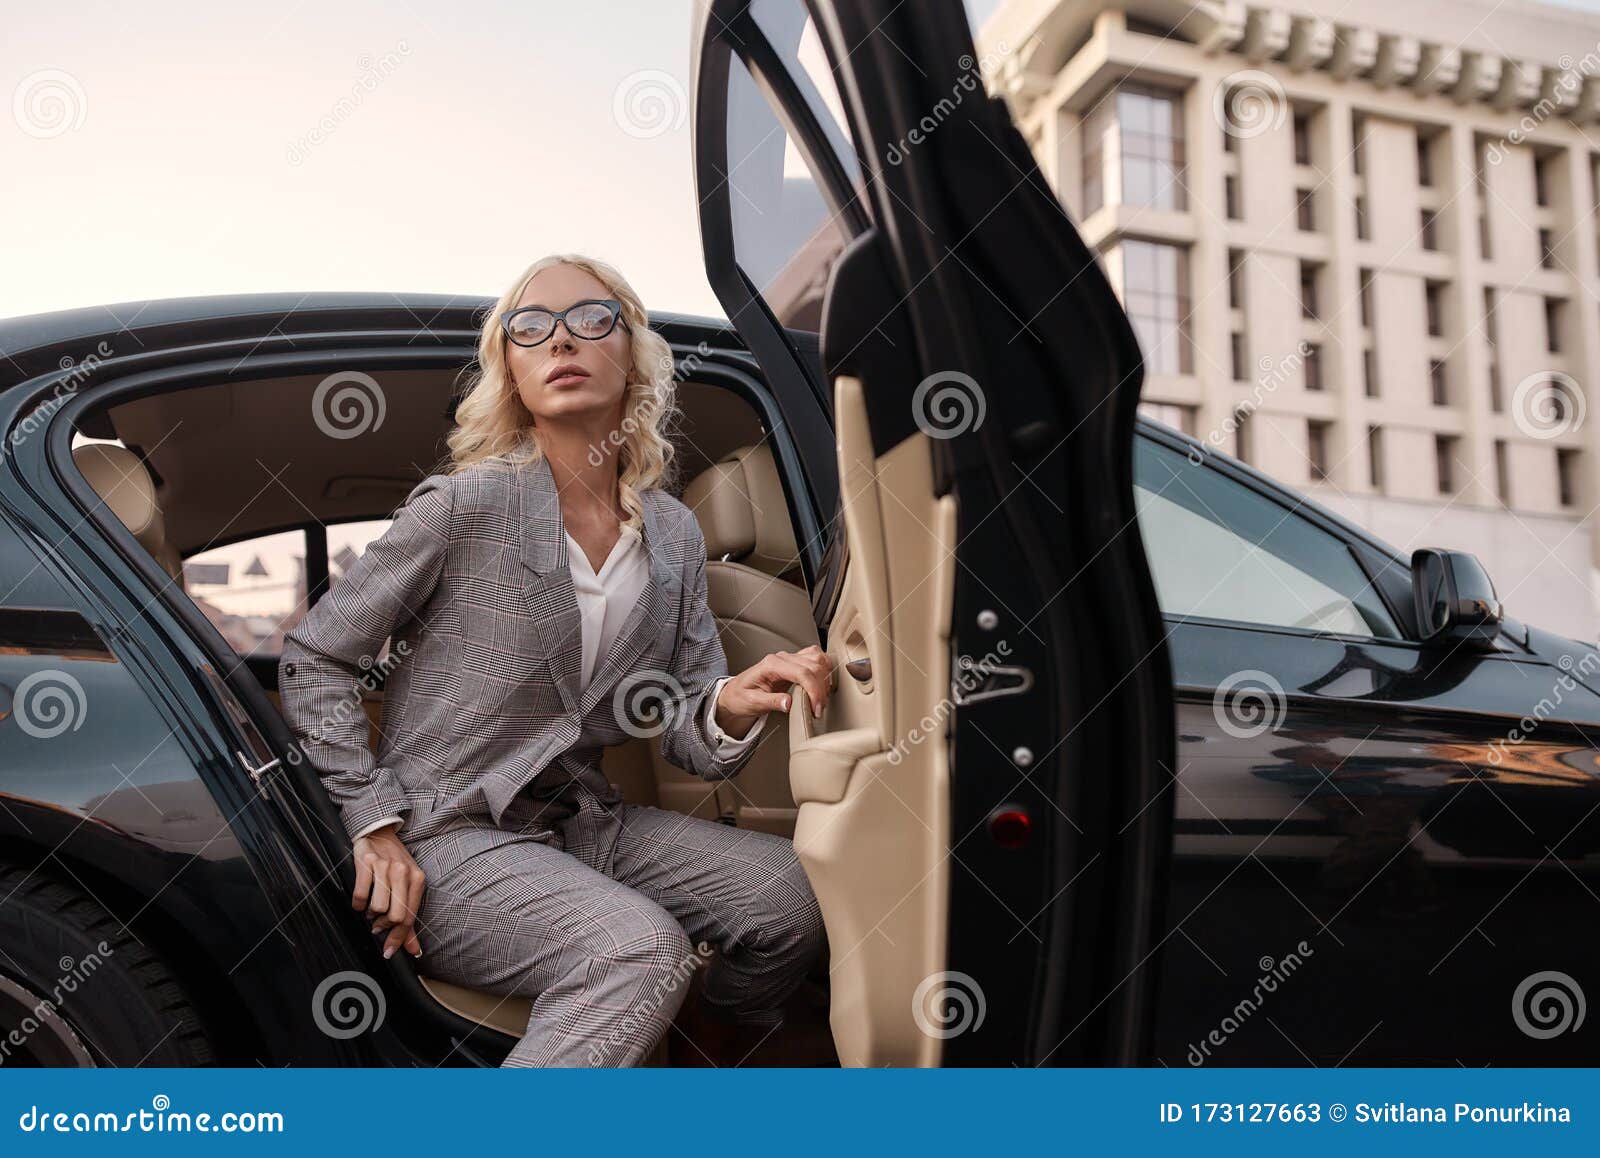 young beautiful business woman in stylish suit getting out of a black car